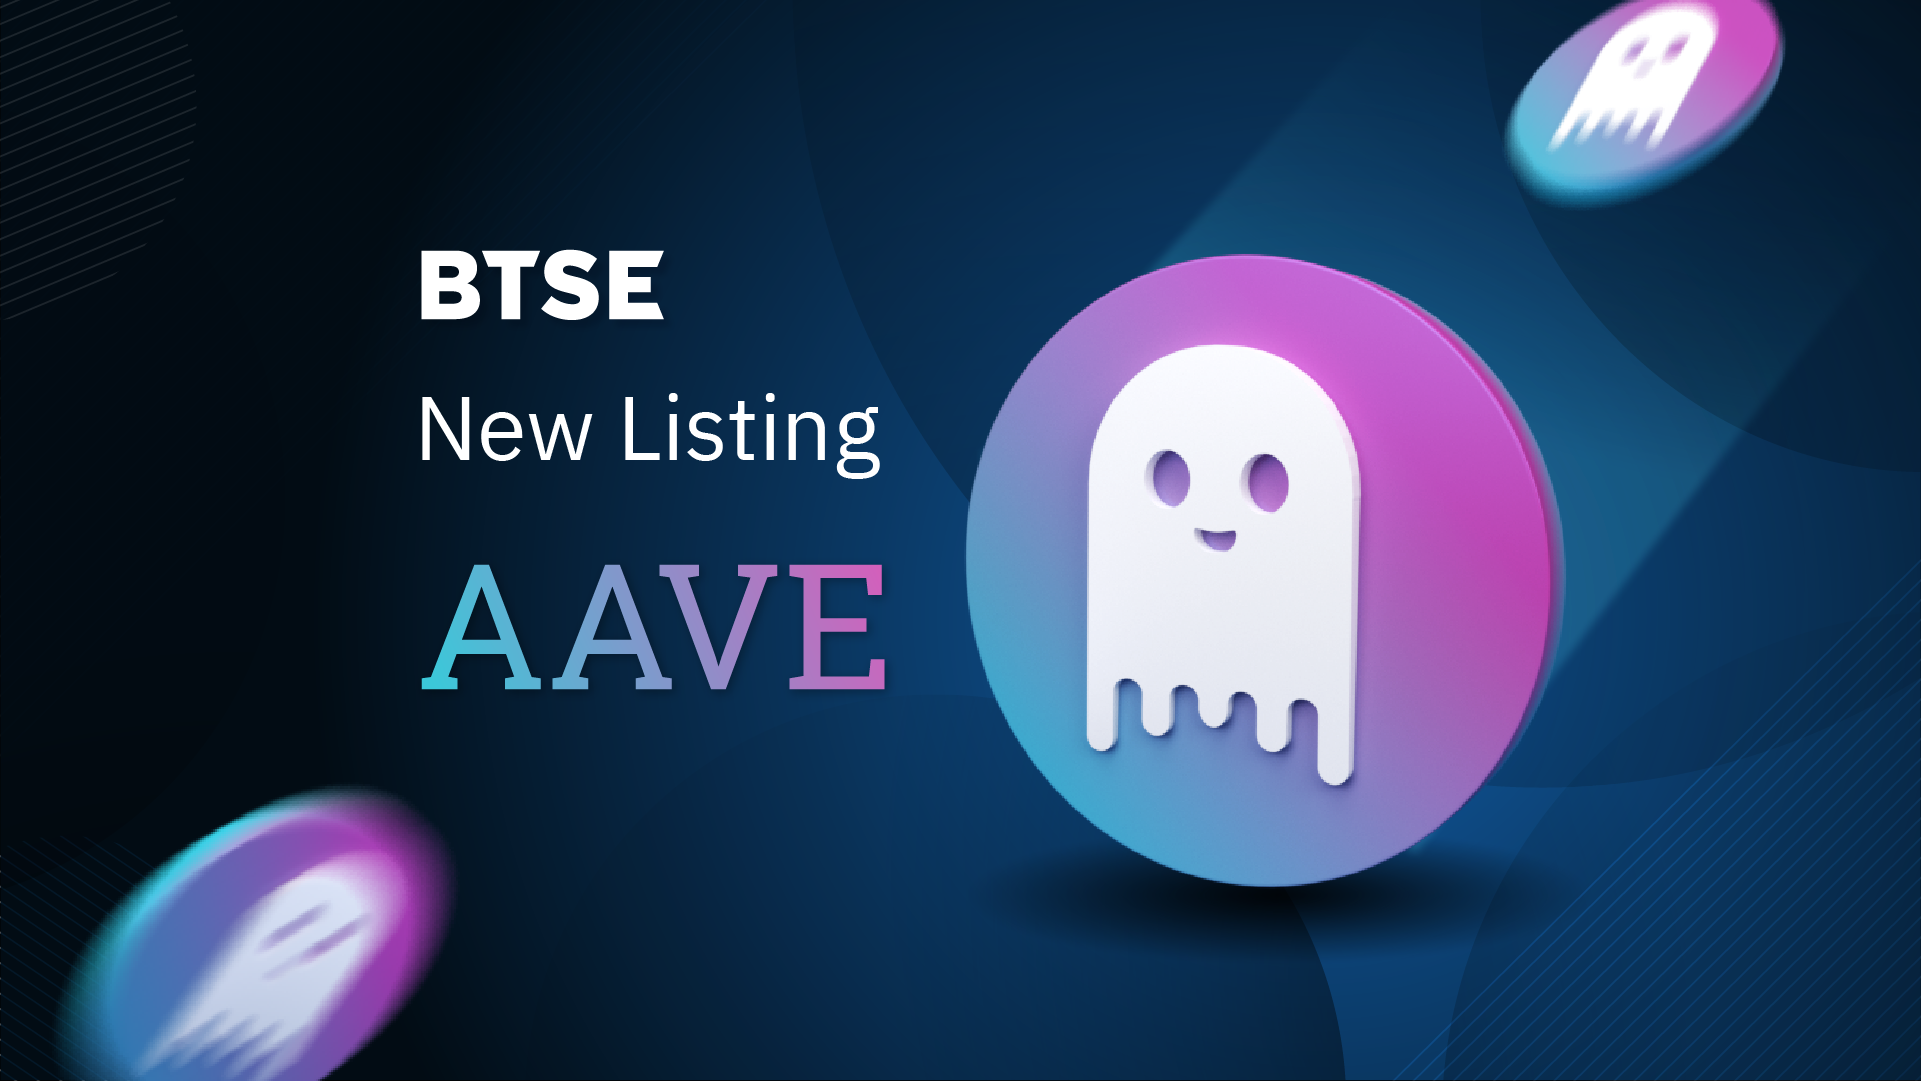 BTSE Brings AAVE Token to Its Users